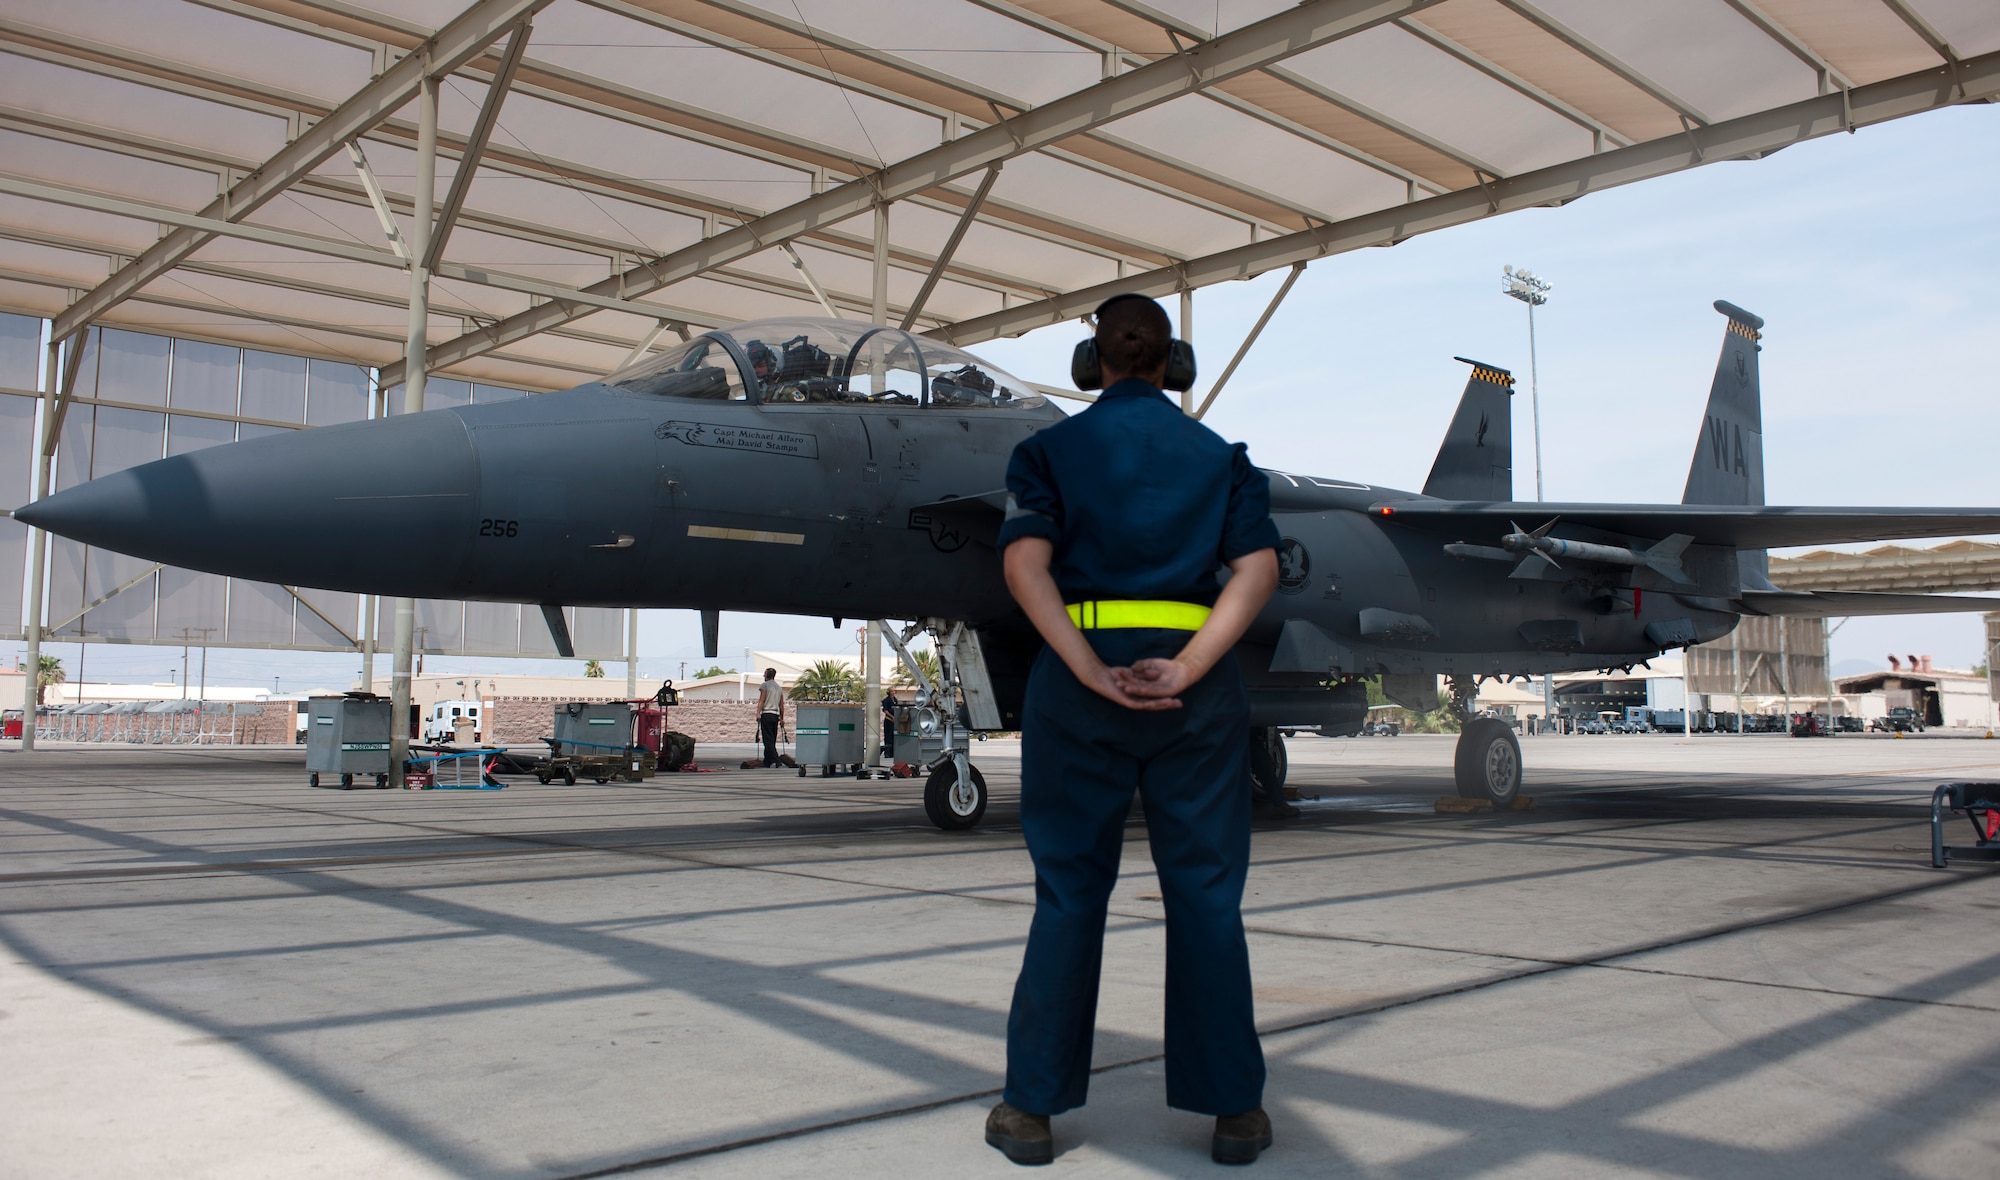 Airman 1st Class Diana Boroski, 757th Aircraft Maintenance Squadron Strike Aircraft Maintenance Unit maintainer, recovers an F-15E Strike Eagle on the flightline at Nellis Air Force Base, Nev., Aug. 19, 2015. Strike AMU supports the 17th Weapons Squadron as well as the 422nd Test and Evaluation Squadron. (U.S. Air Force photo by Airman 1st Class Mikaley Towle)